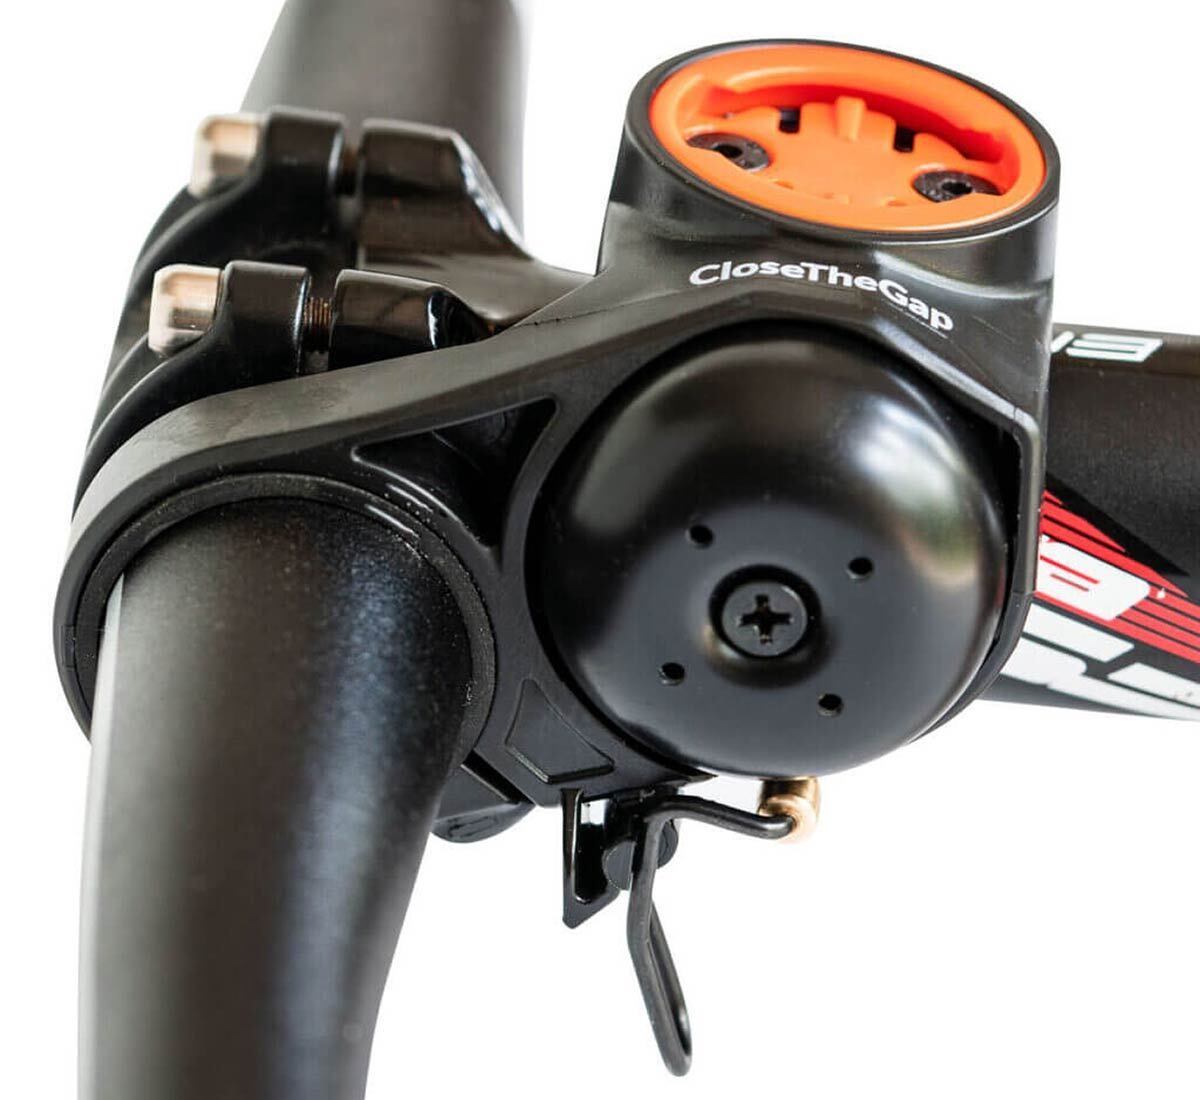 CloseTheGap HideMyBell Insider2 cycling computer GPS mounts with integrated bell